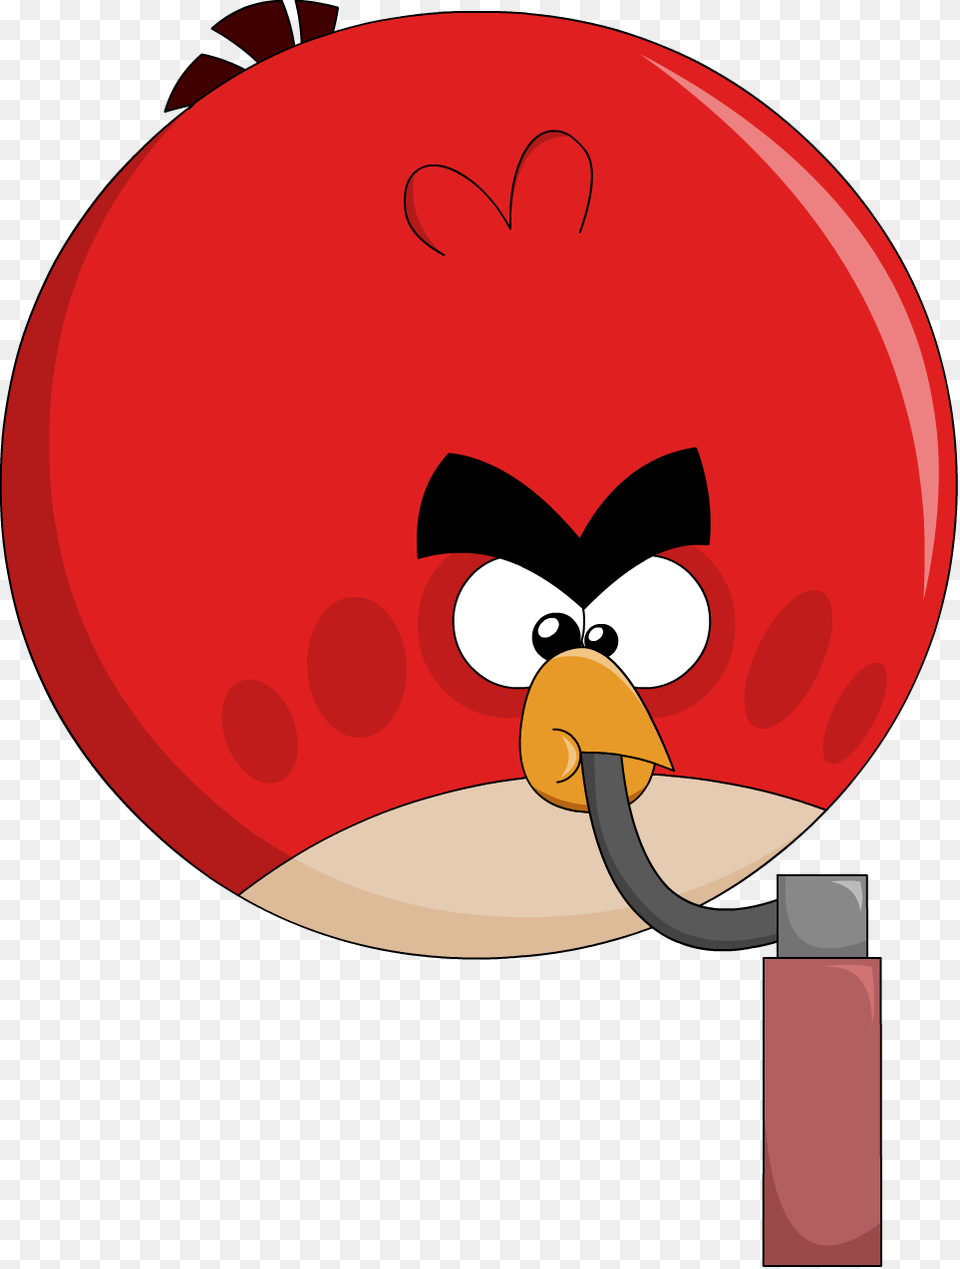 Angry Birds Stella Angry Birds Star Wars Angry Birds Stella Angry Birds Rio, Balloon Free Png